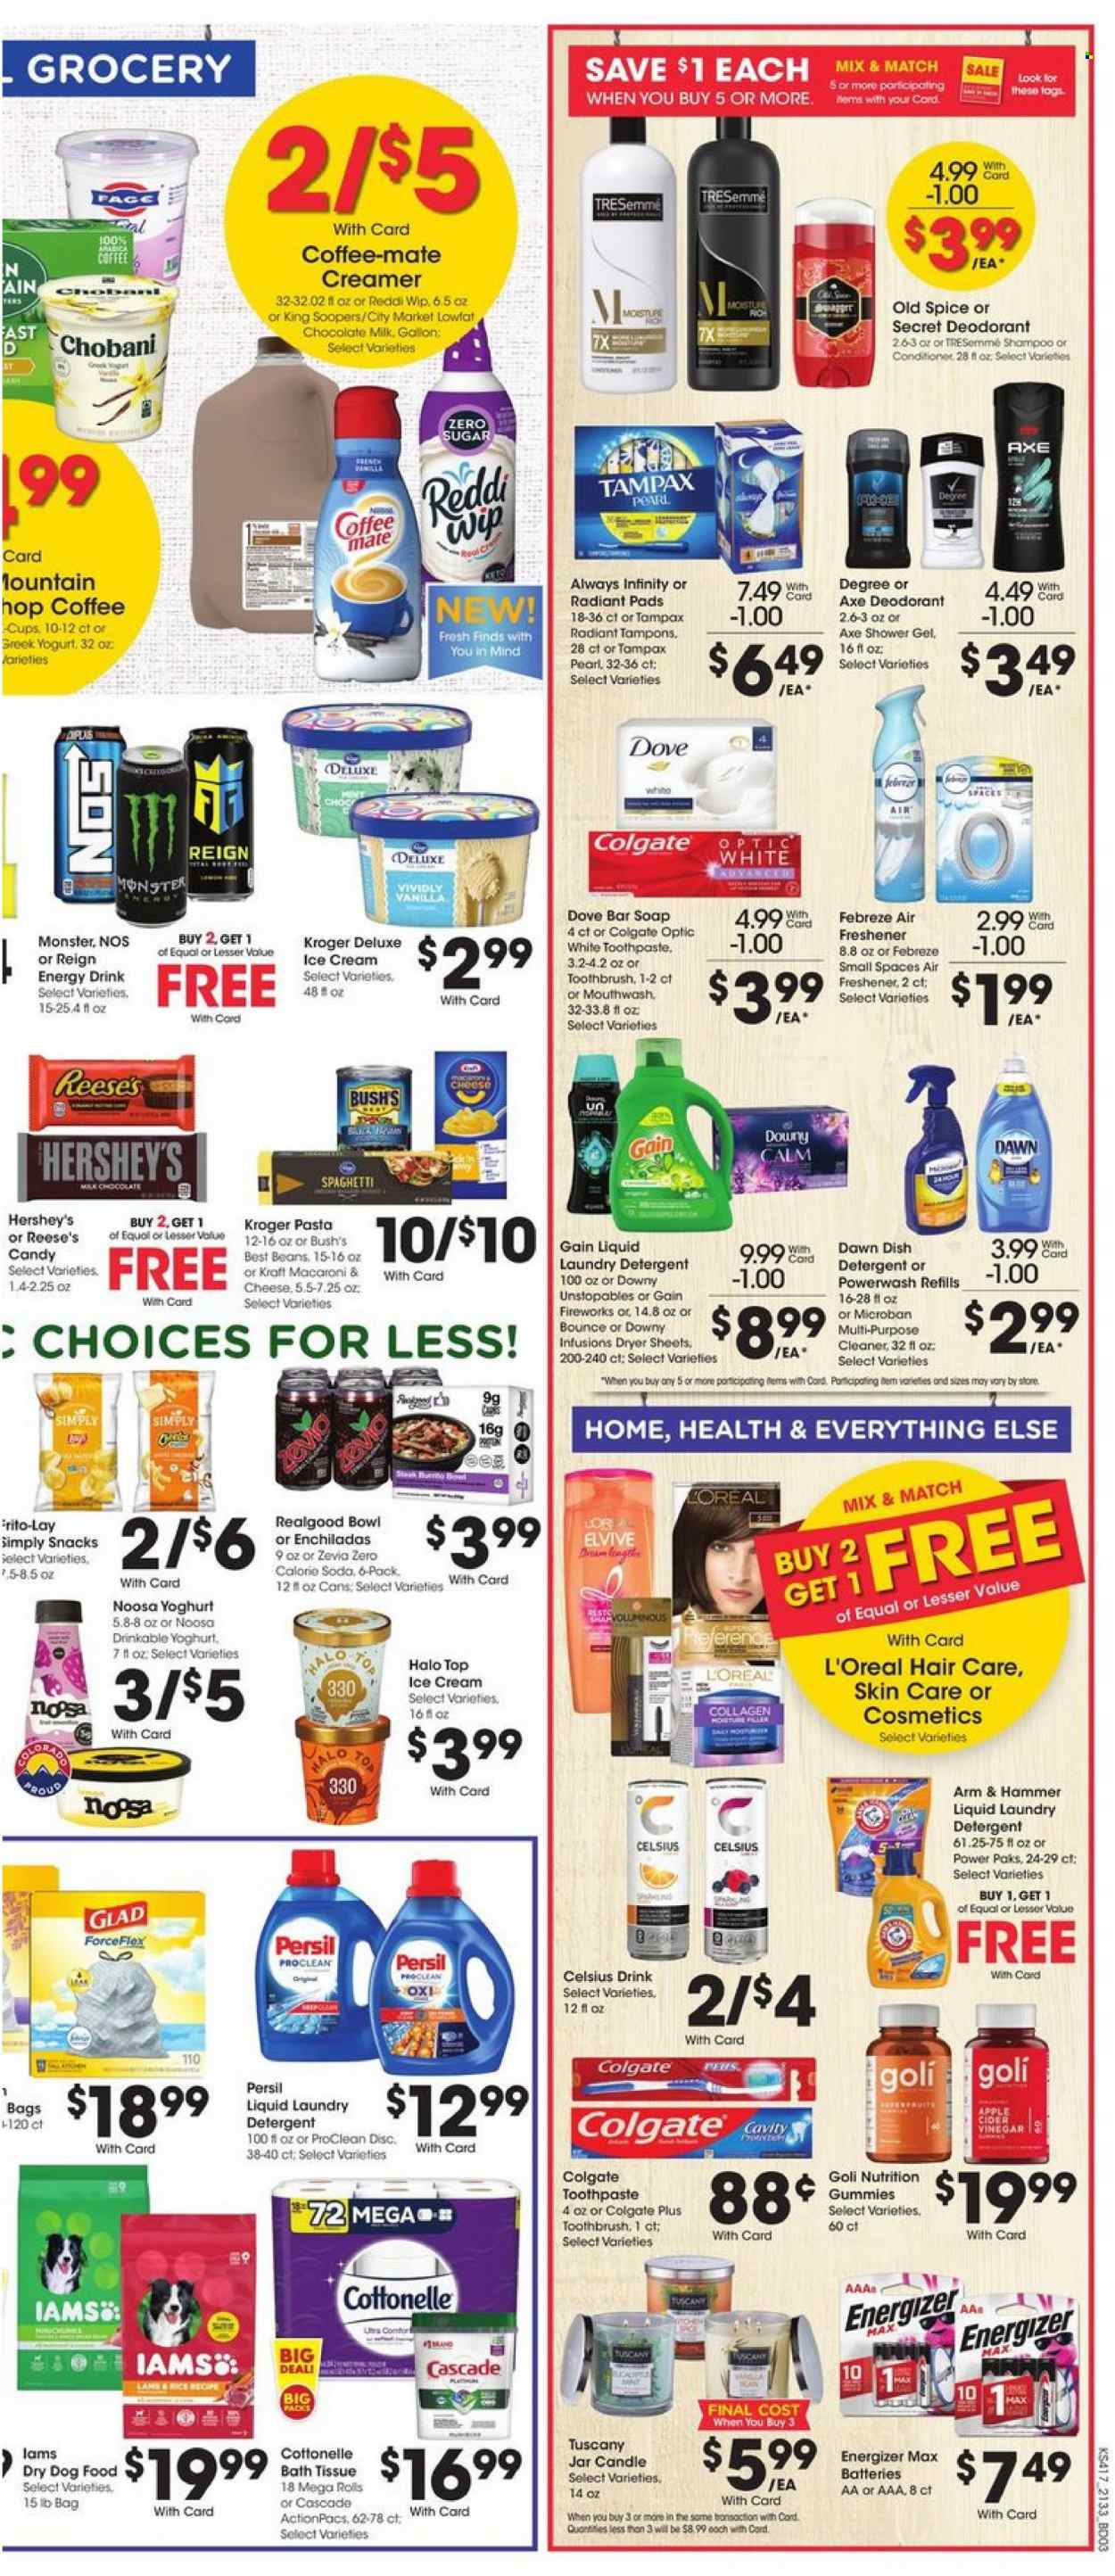 thumbnail - City Market Flyer - 09/15/2021 - 09/21/2021 - Sales products - enchiladas, macaroni & cheese, spaghetti, pasta, Kraft®, yoghurt, Chobani, Coffee-Mate, milk, creamer, ice cream, Reese's, Hershey's, milk chocolate, snack, Frito-Lay, ARM & HAMMER, spice, apple cider vinegar, vinegar, energy drink, Monster, soda, Dove, bath tissue, Cottonelle, detergent, Febreze, Gain, cleaner, Cascade, Unstopables, Persil, laundry detergent, dryer sheets, Gain Fireworks, Downy Laundry, shampoo, shower gel, Old Spice, soap bar, soap, Colgate, toothbrush, toothpaste, mouthwash, Tampax, tampons, Always Infinity, L’Oréal, conditioner, TRESemmé, anti-perspirant, deodorant, cup, bowl, candle, air freshener, battery, Energizer, animal food, dog food, dry dog food, Iams. Page 6.